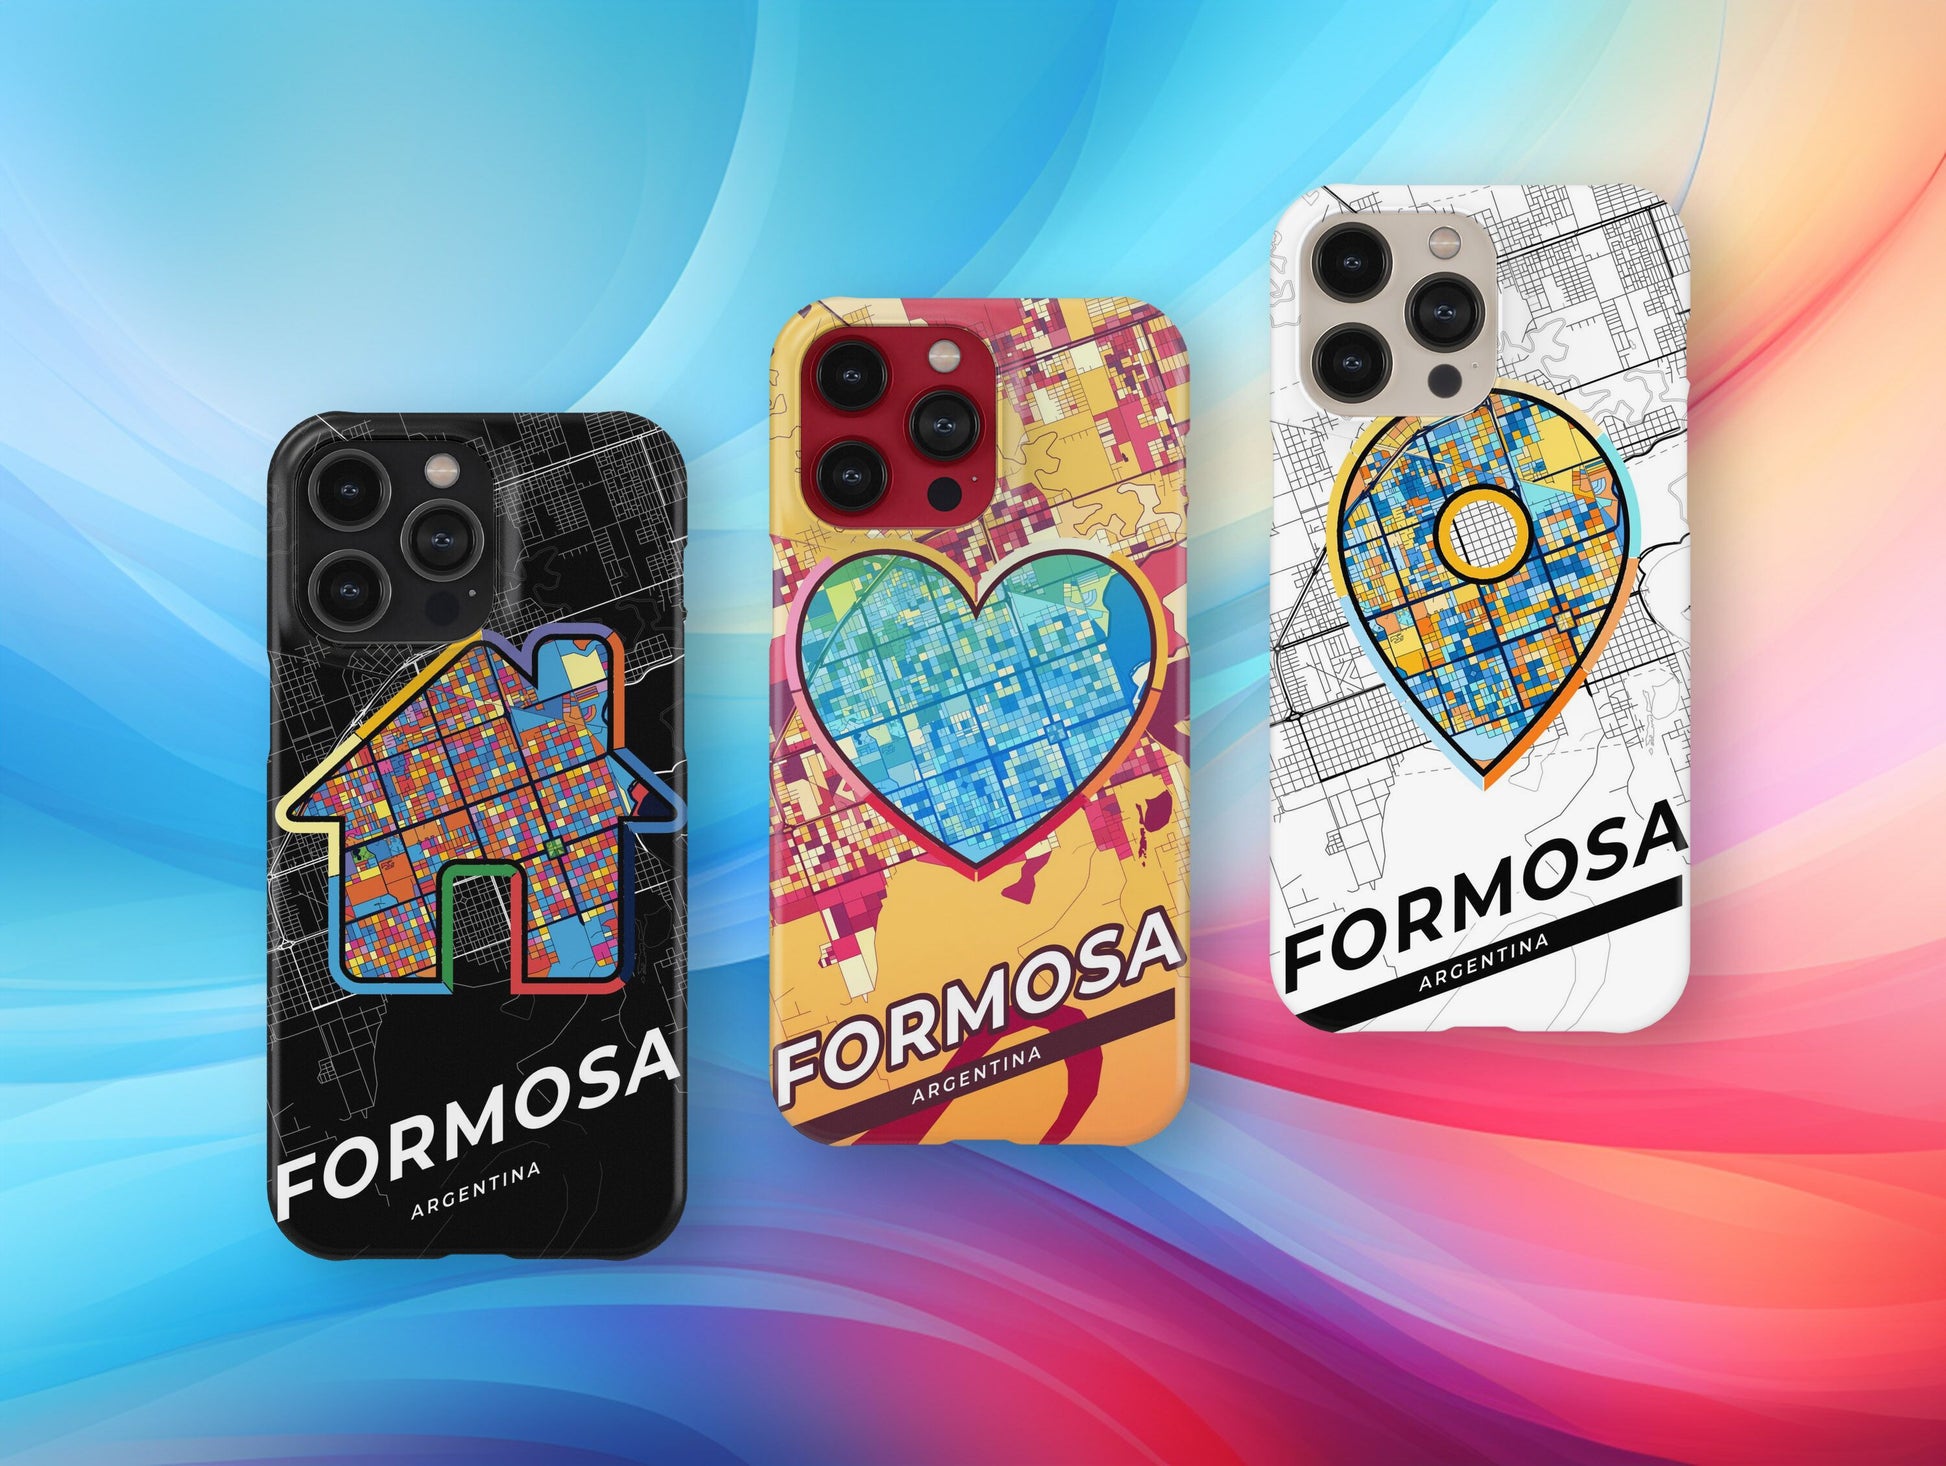 Formosa Argentina slim phone case with colorful icon. Birthday, wedding or housewarming gift. Couple match cases.